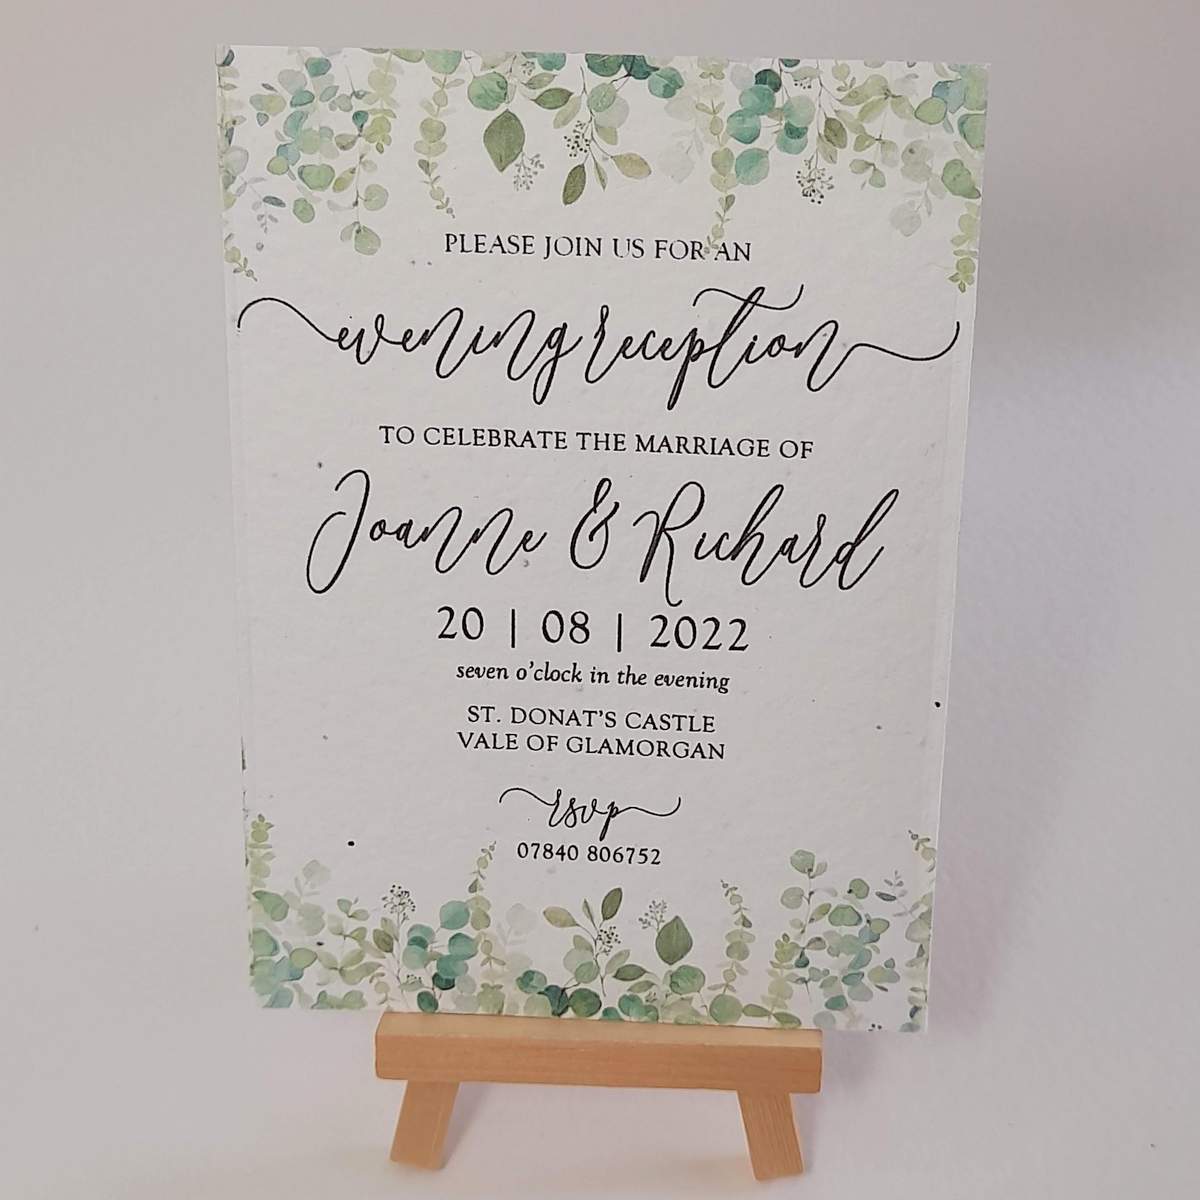 a wedding invitation with leafy greenery design to the top and bottom, printed onto plantable seed paper